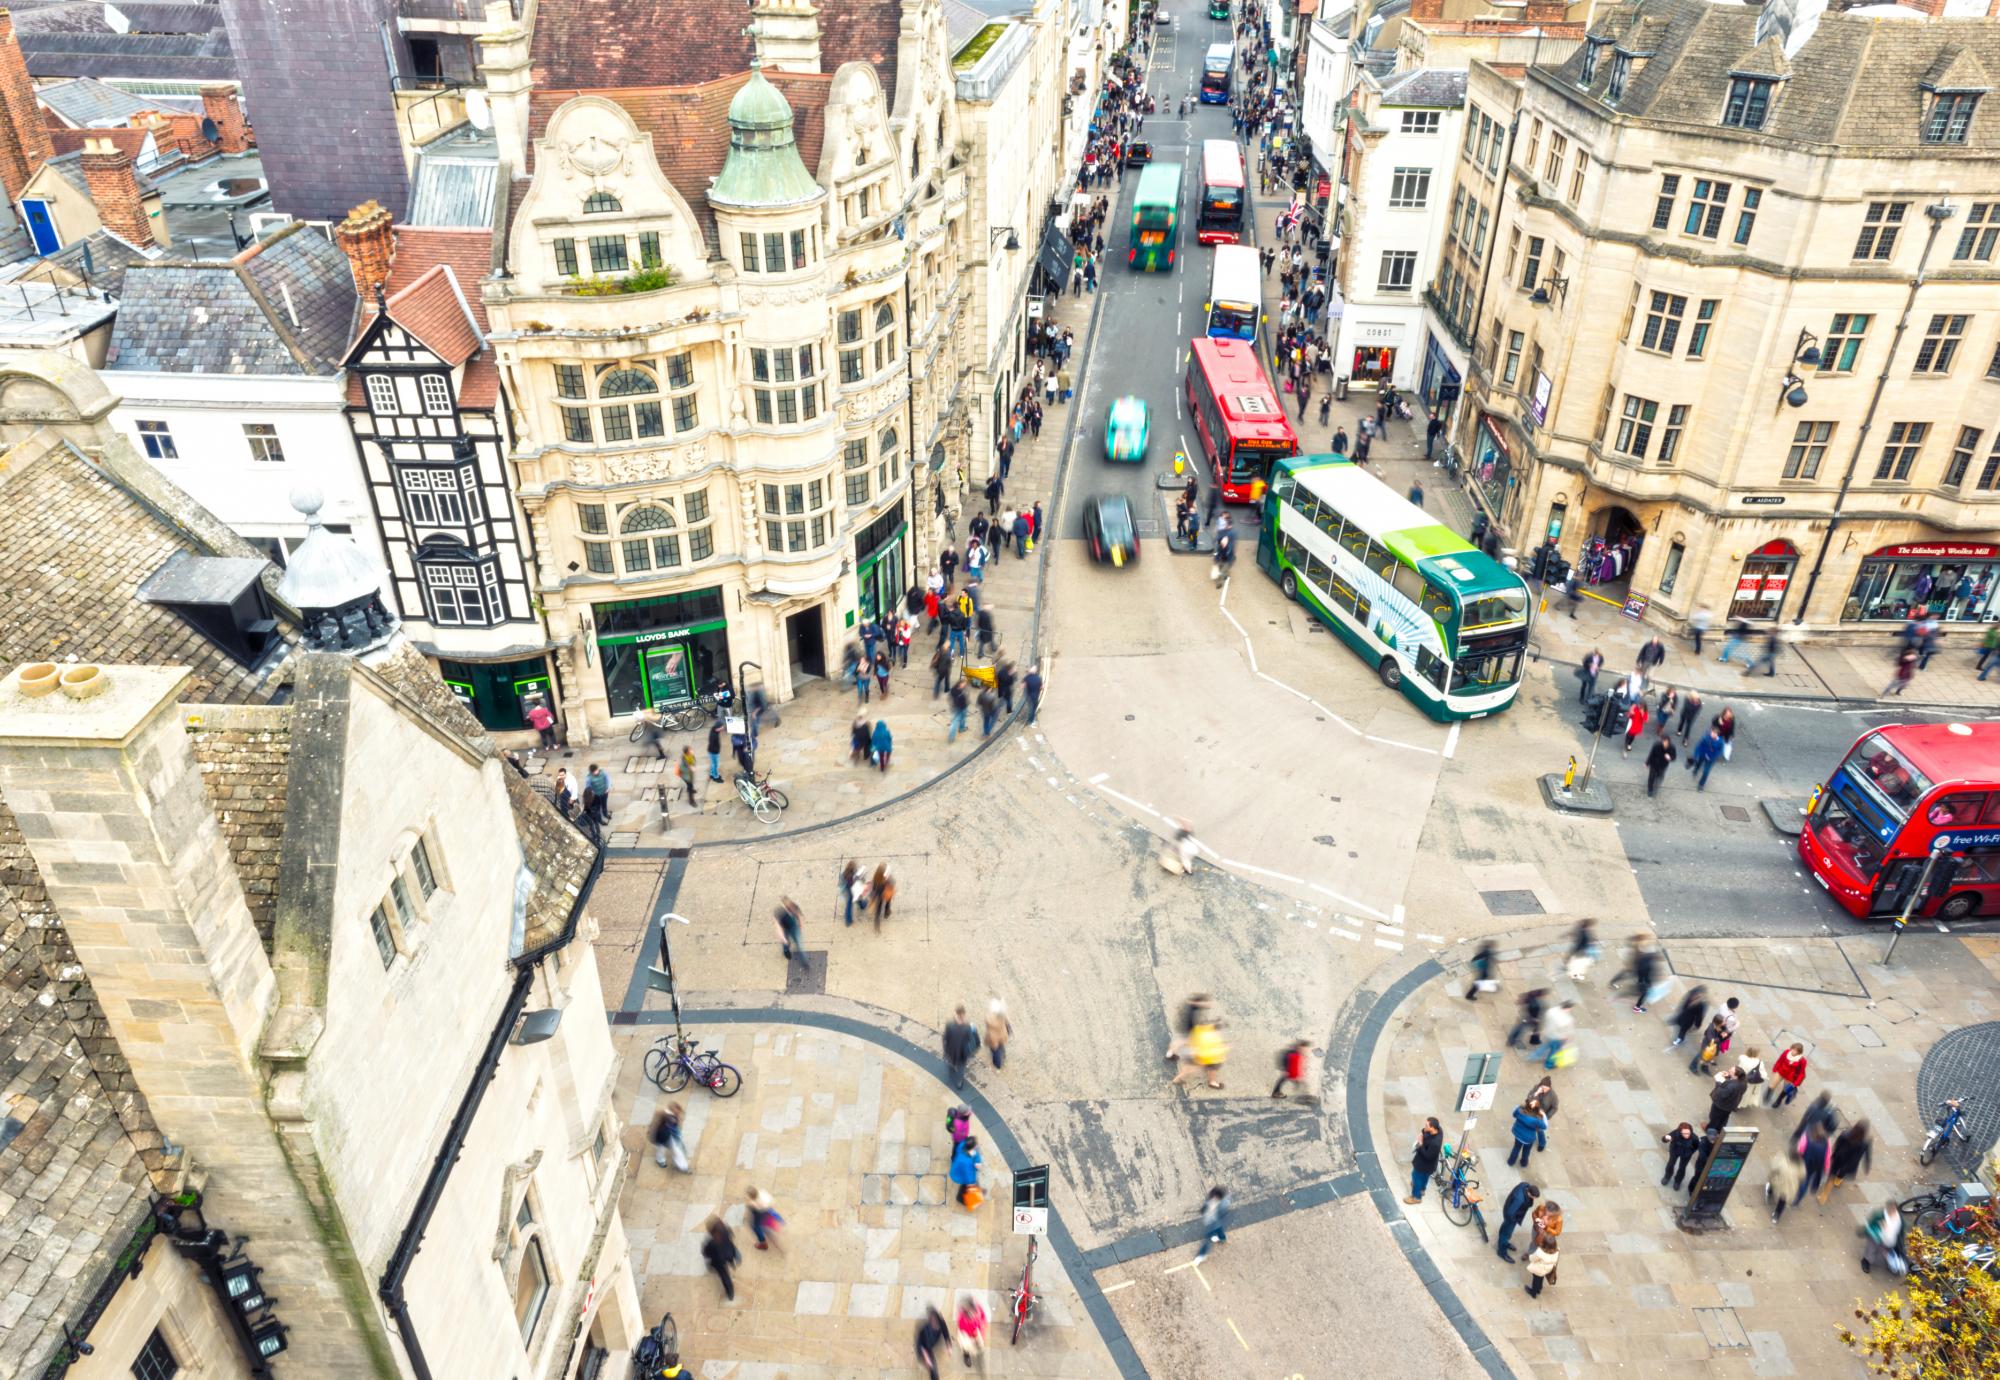 Buses in Oxford, from above